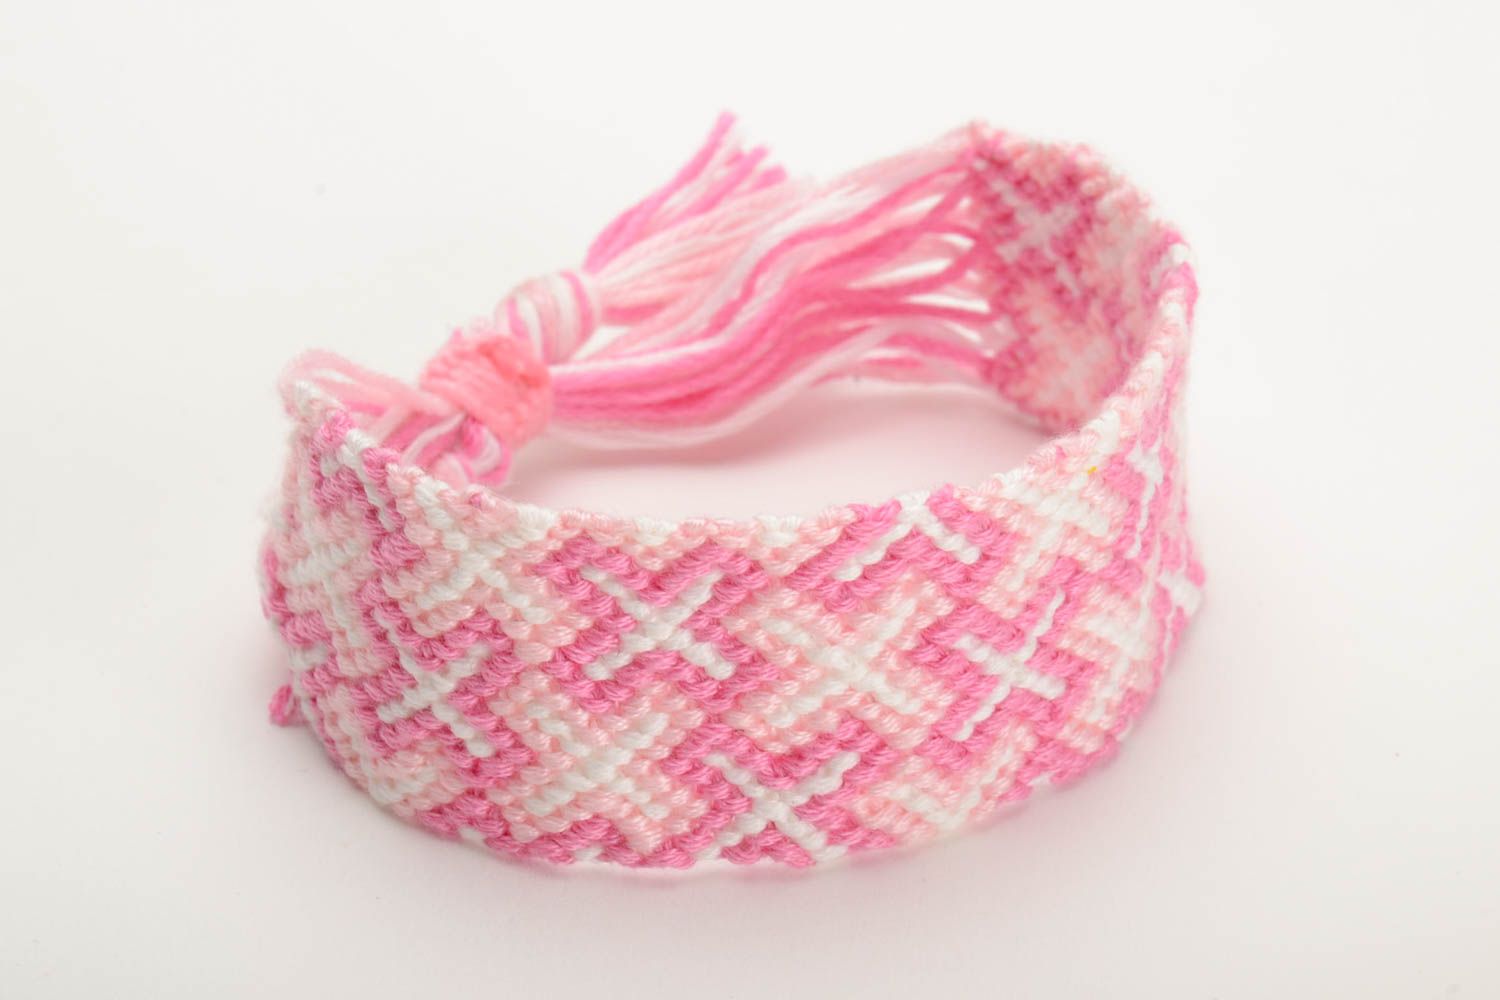 Handmade multicolored woven friendship bracelet pink and white present for girl photo 4